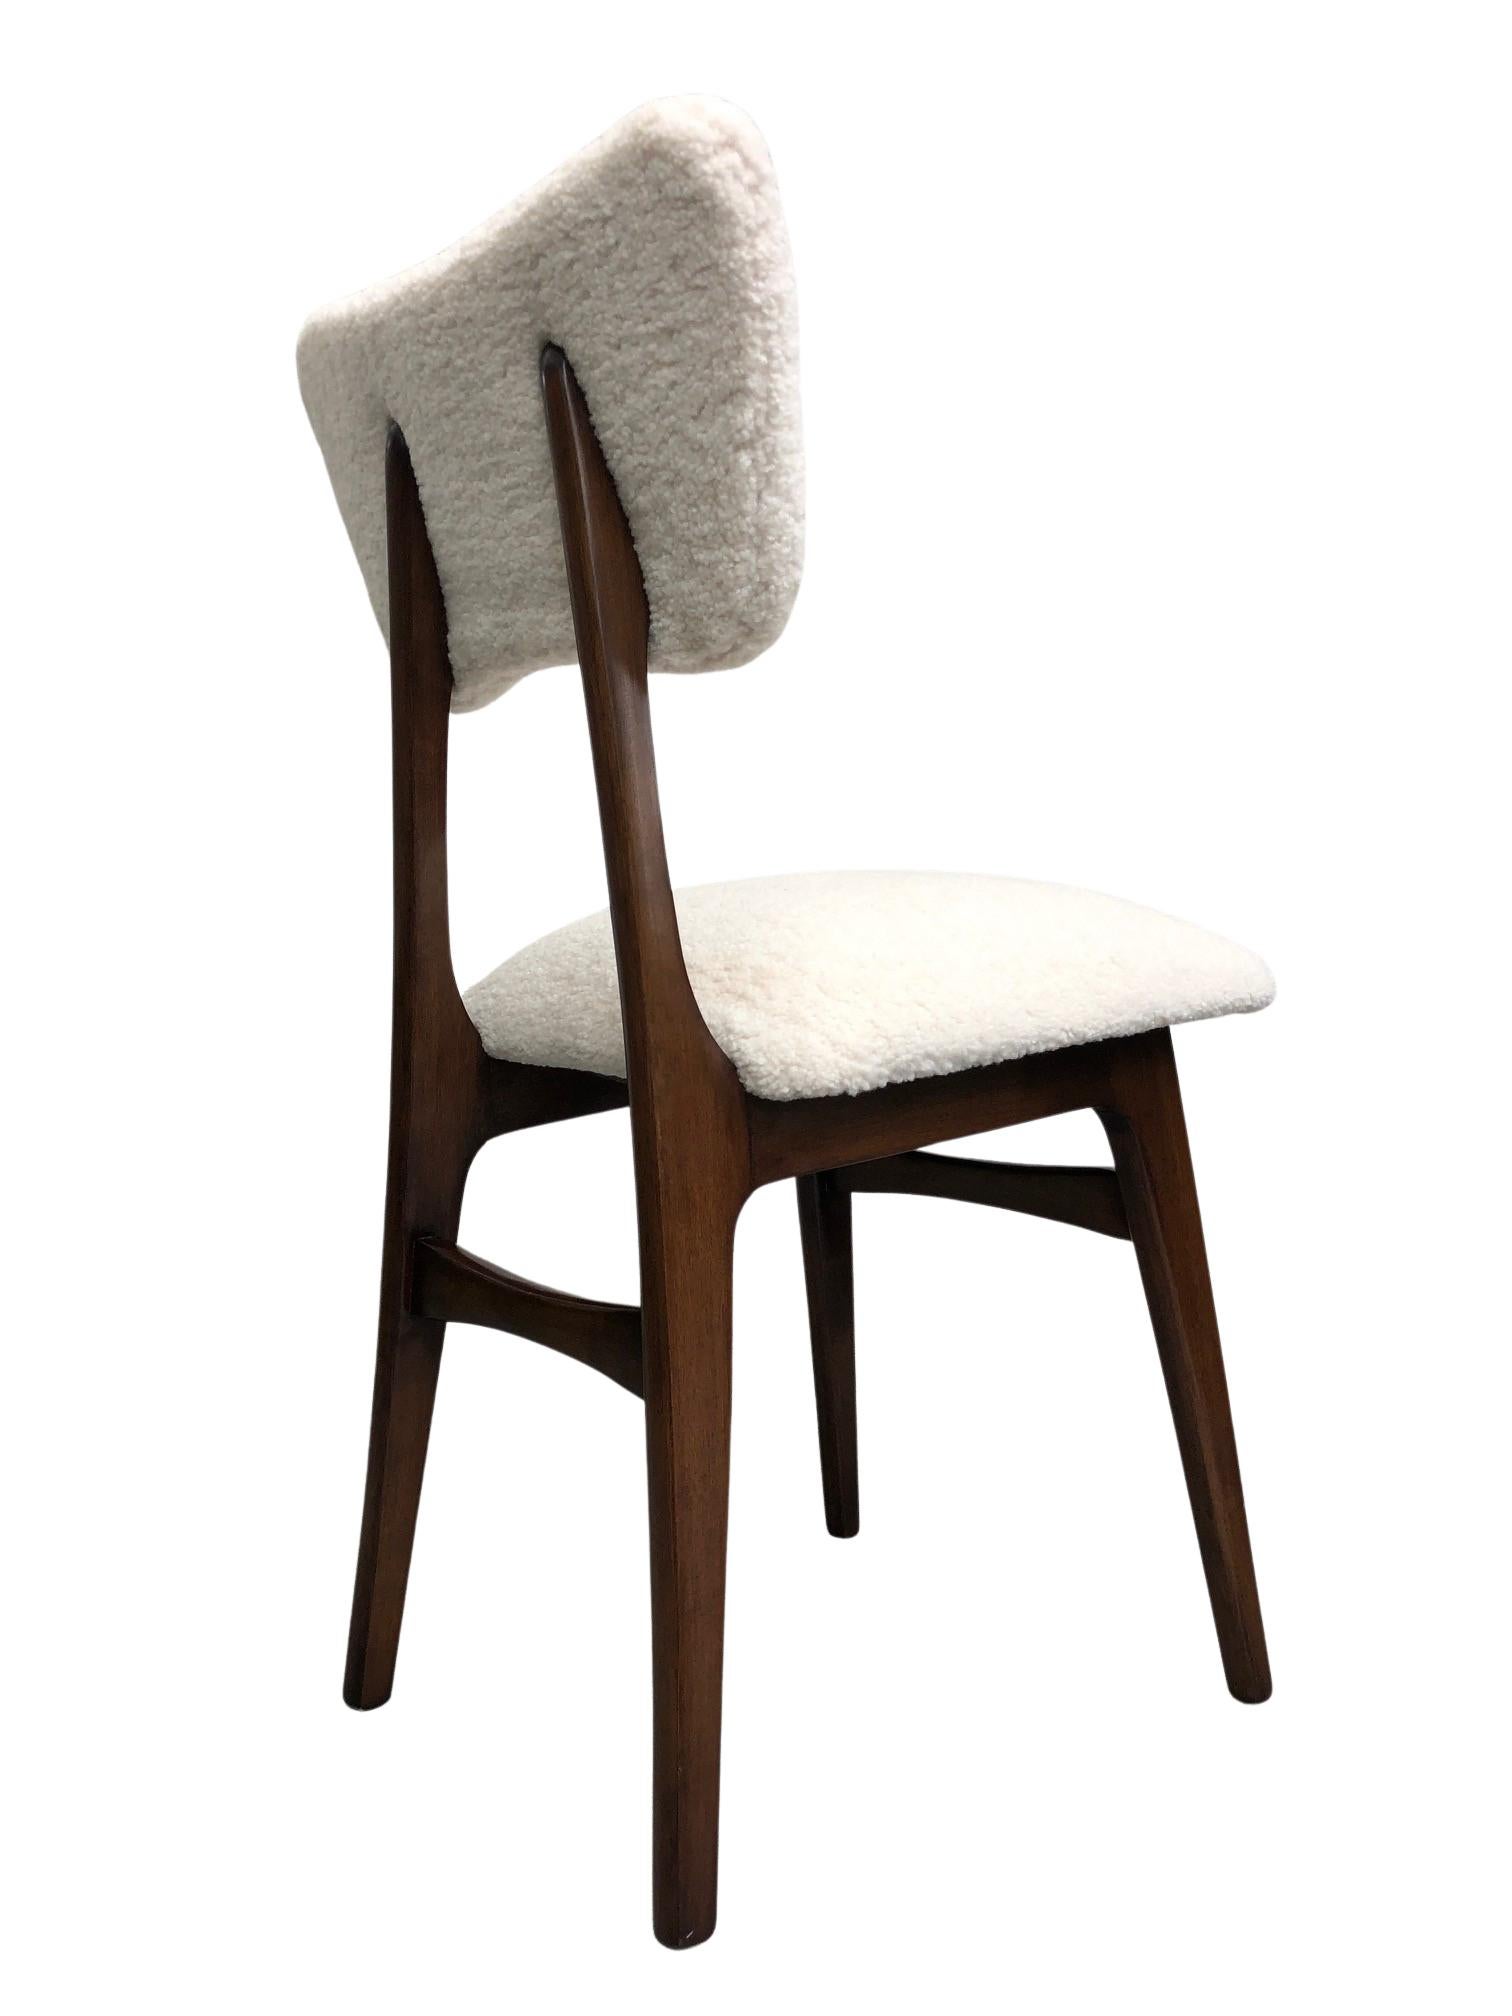 20th Century Set of 4 Midcentury Beige Bouclé Dining Chairs, Europe, 1960s For Sale